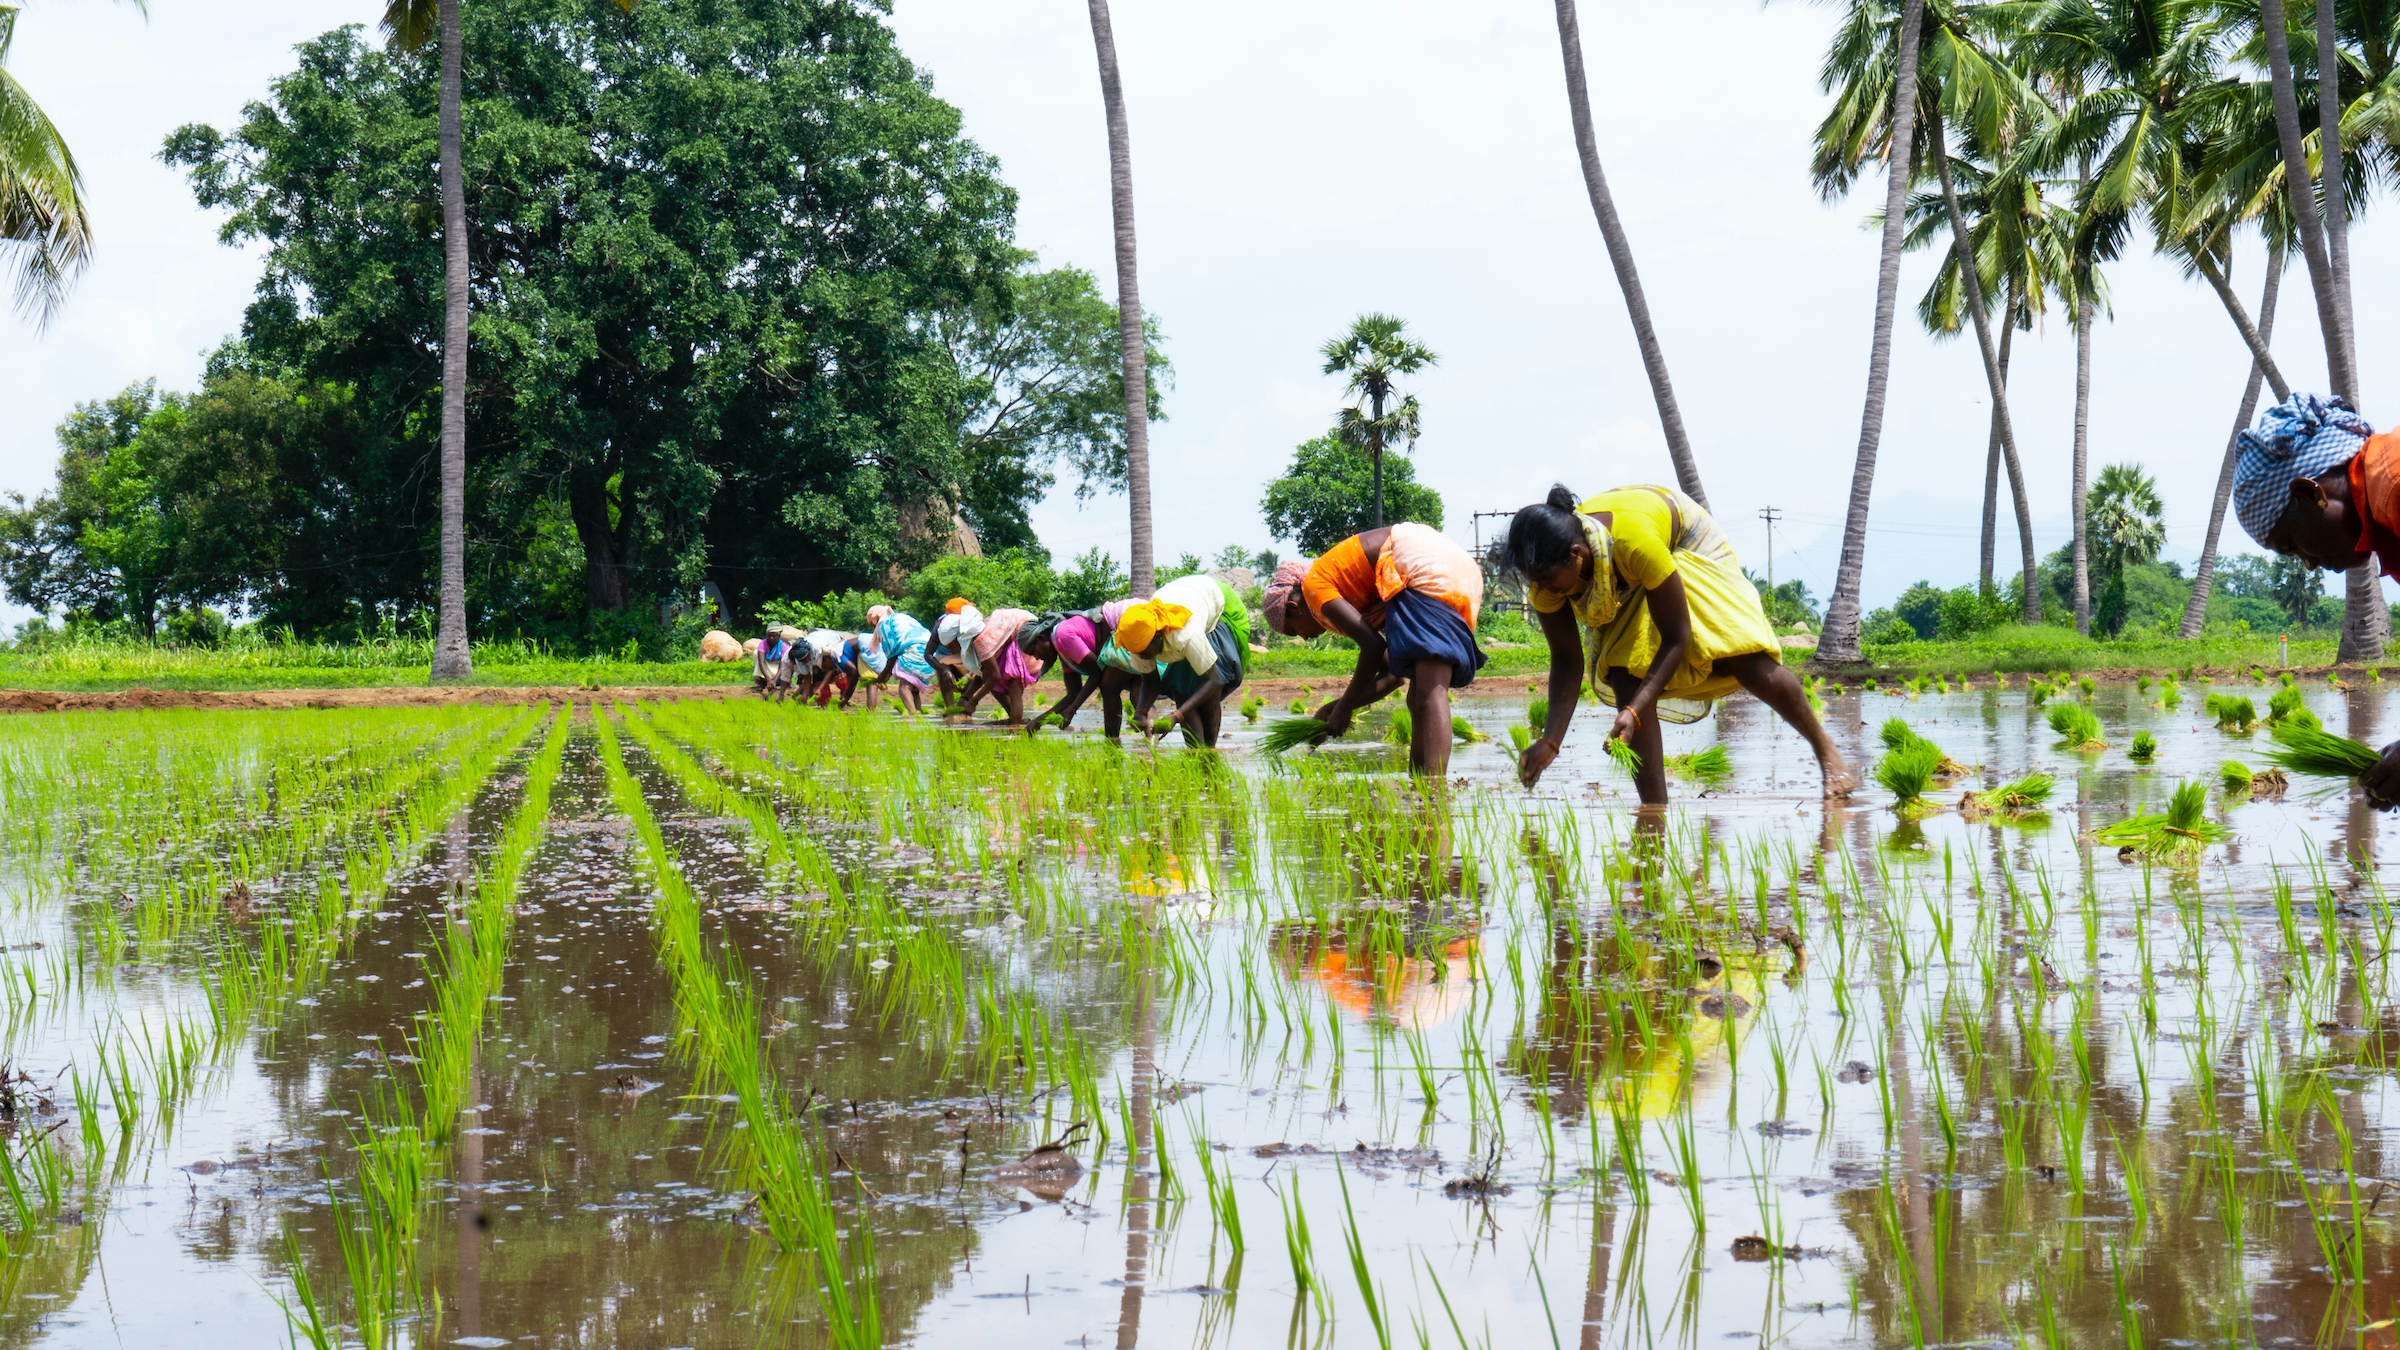 Women standing in rice paddy, bent over, placing rice plants